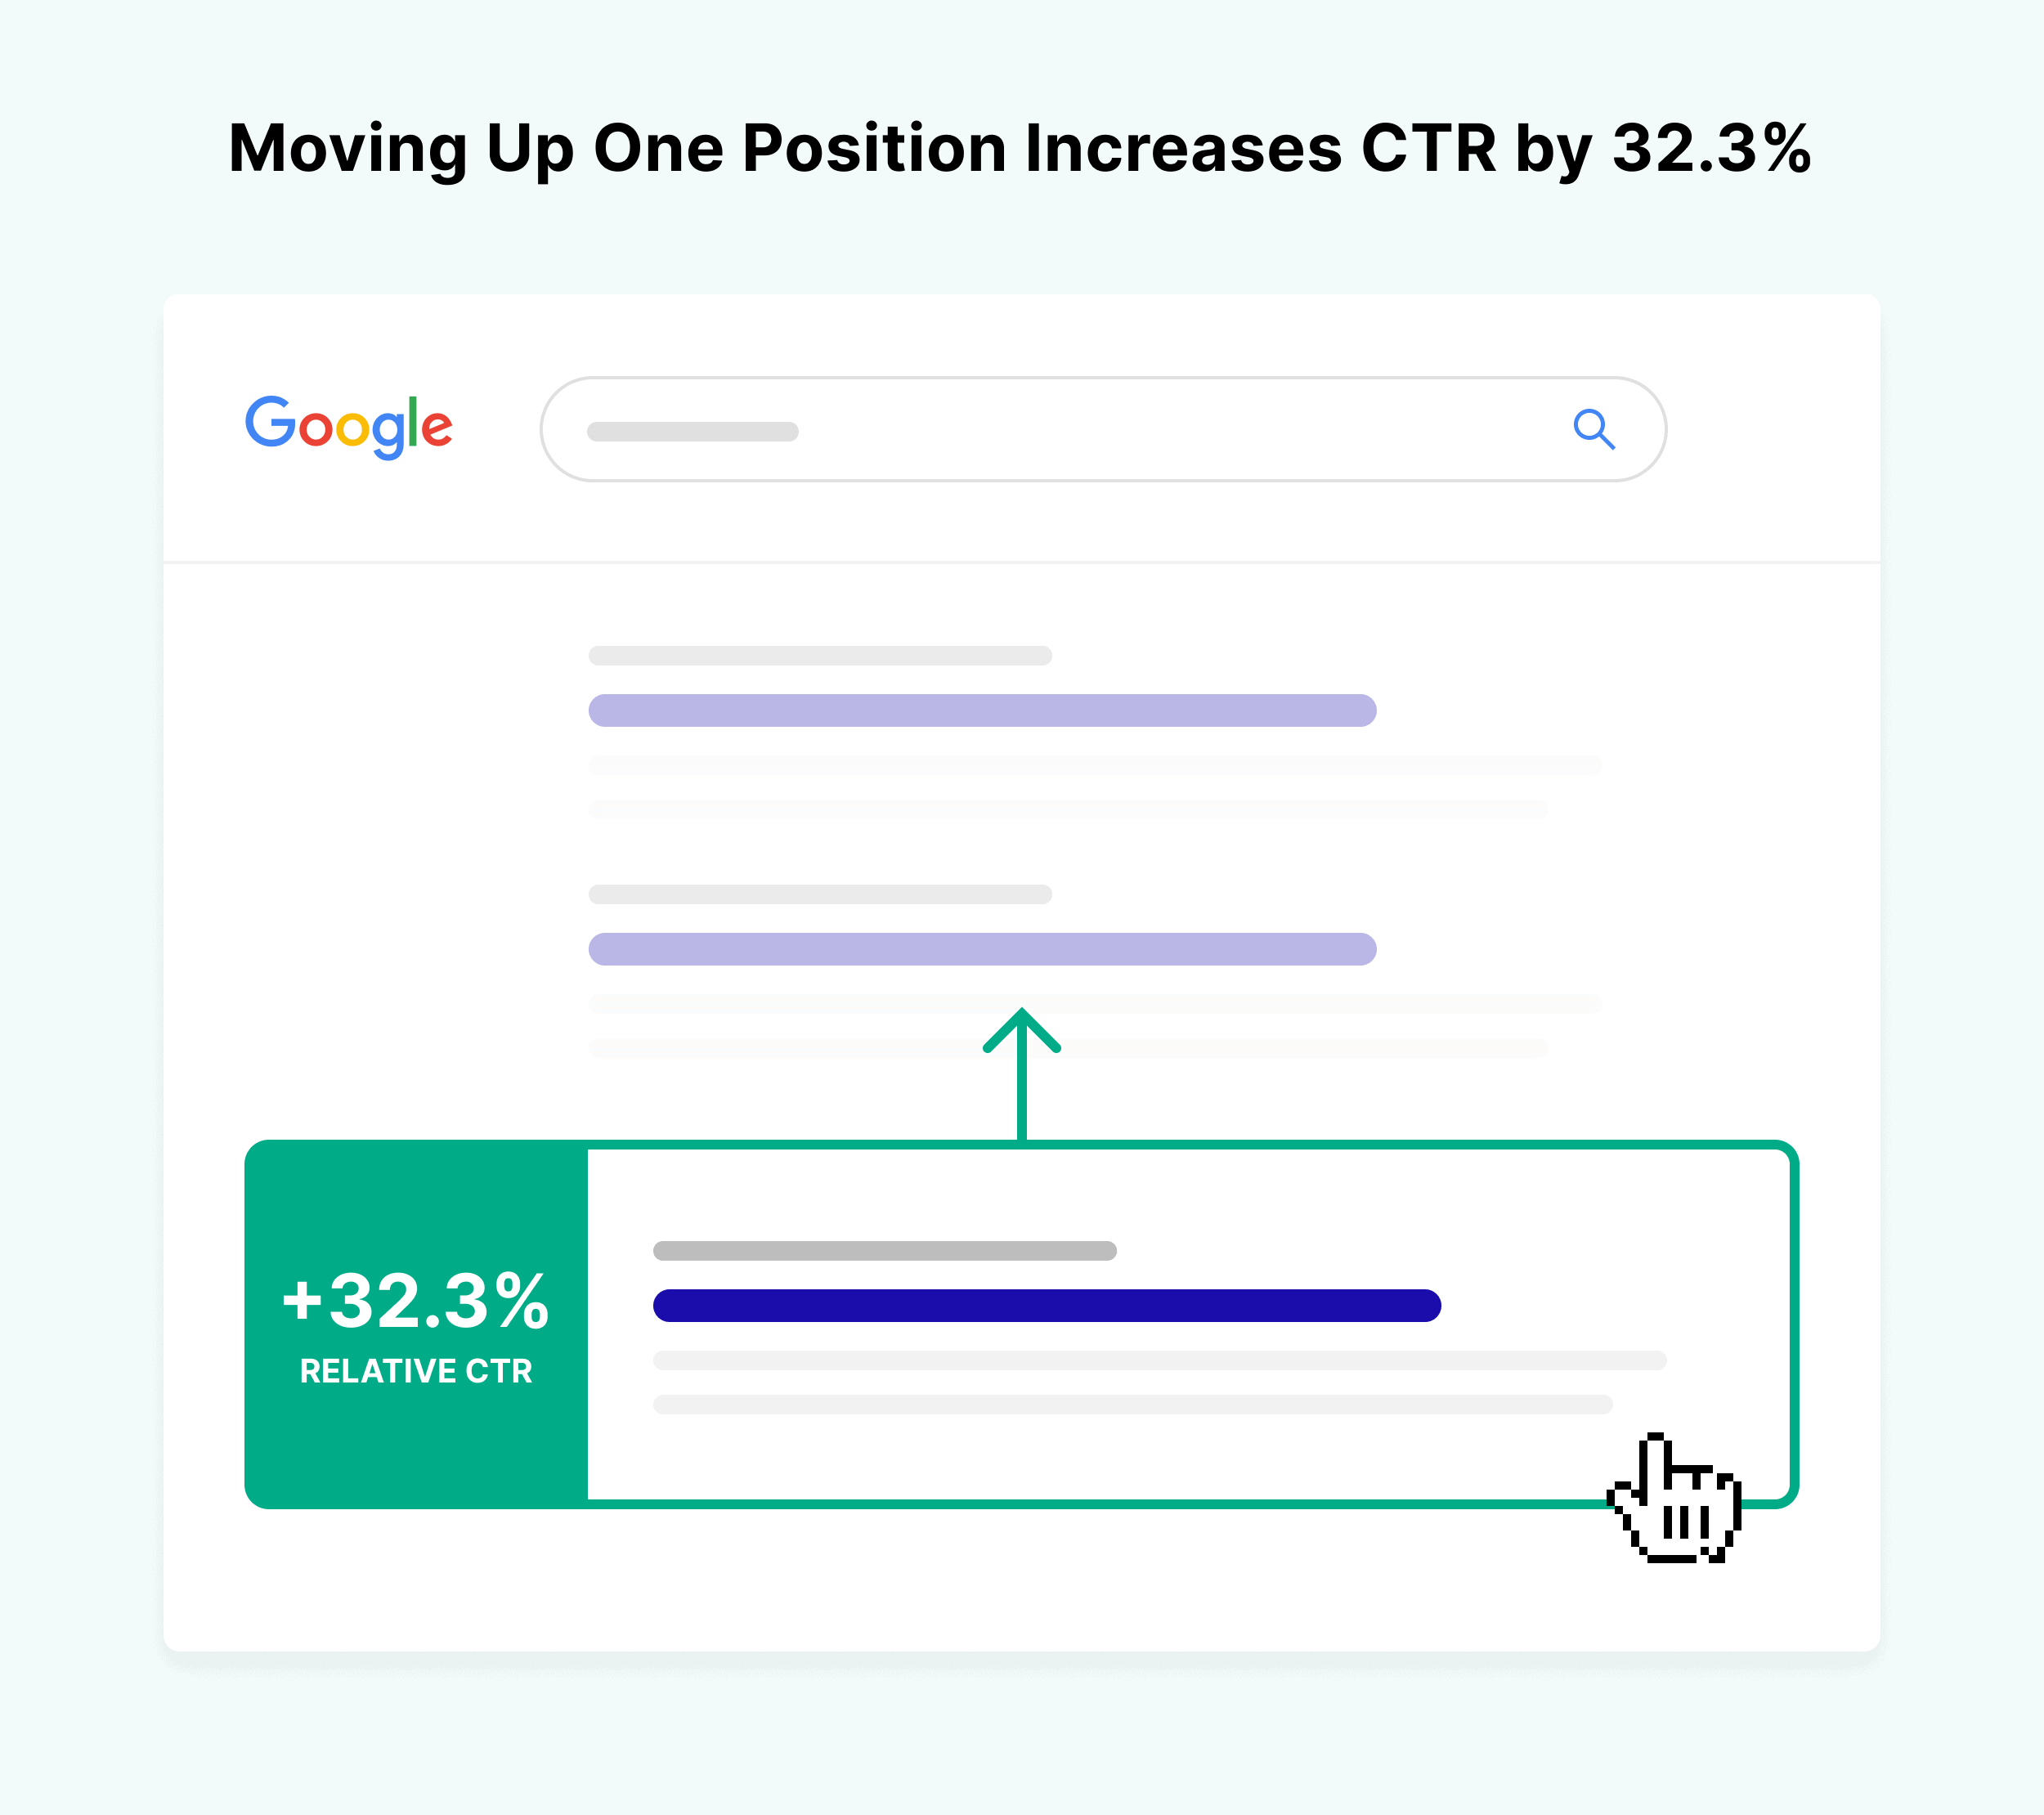 Moving up one position increases CTR by 32.3%